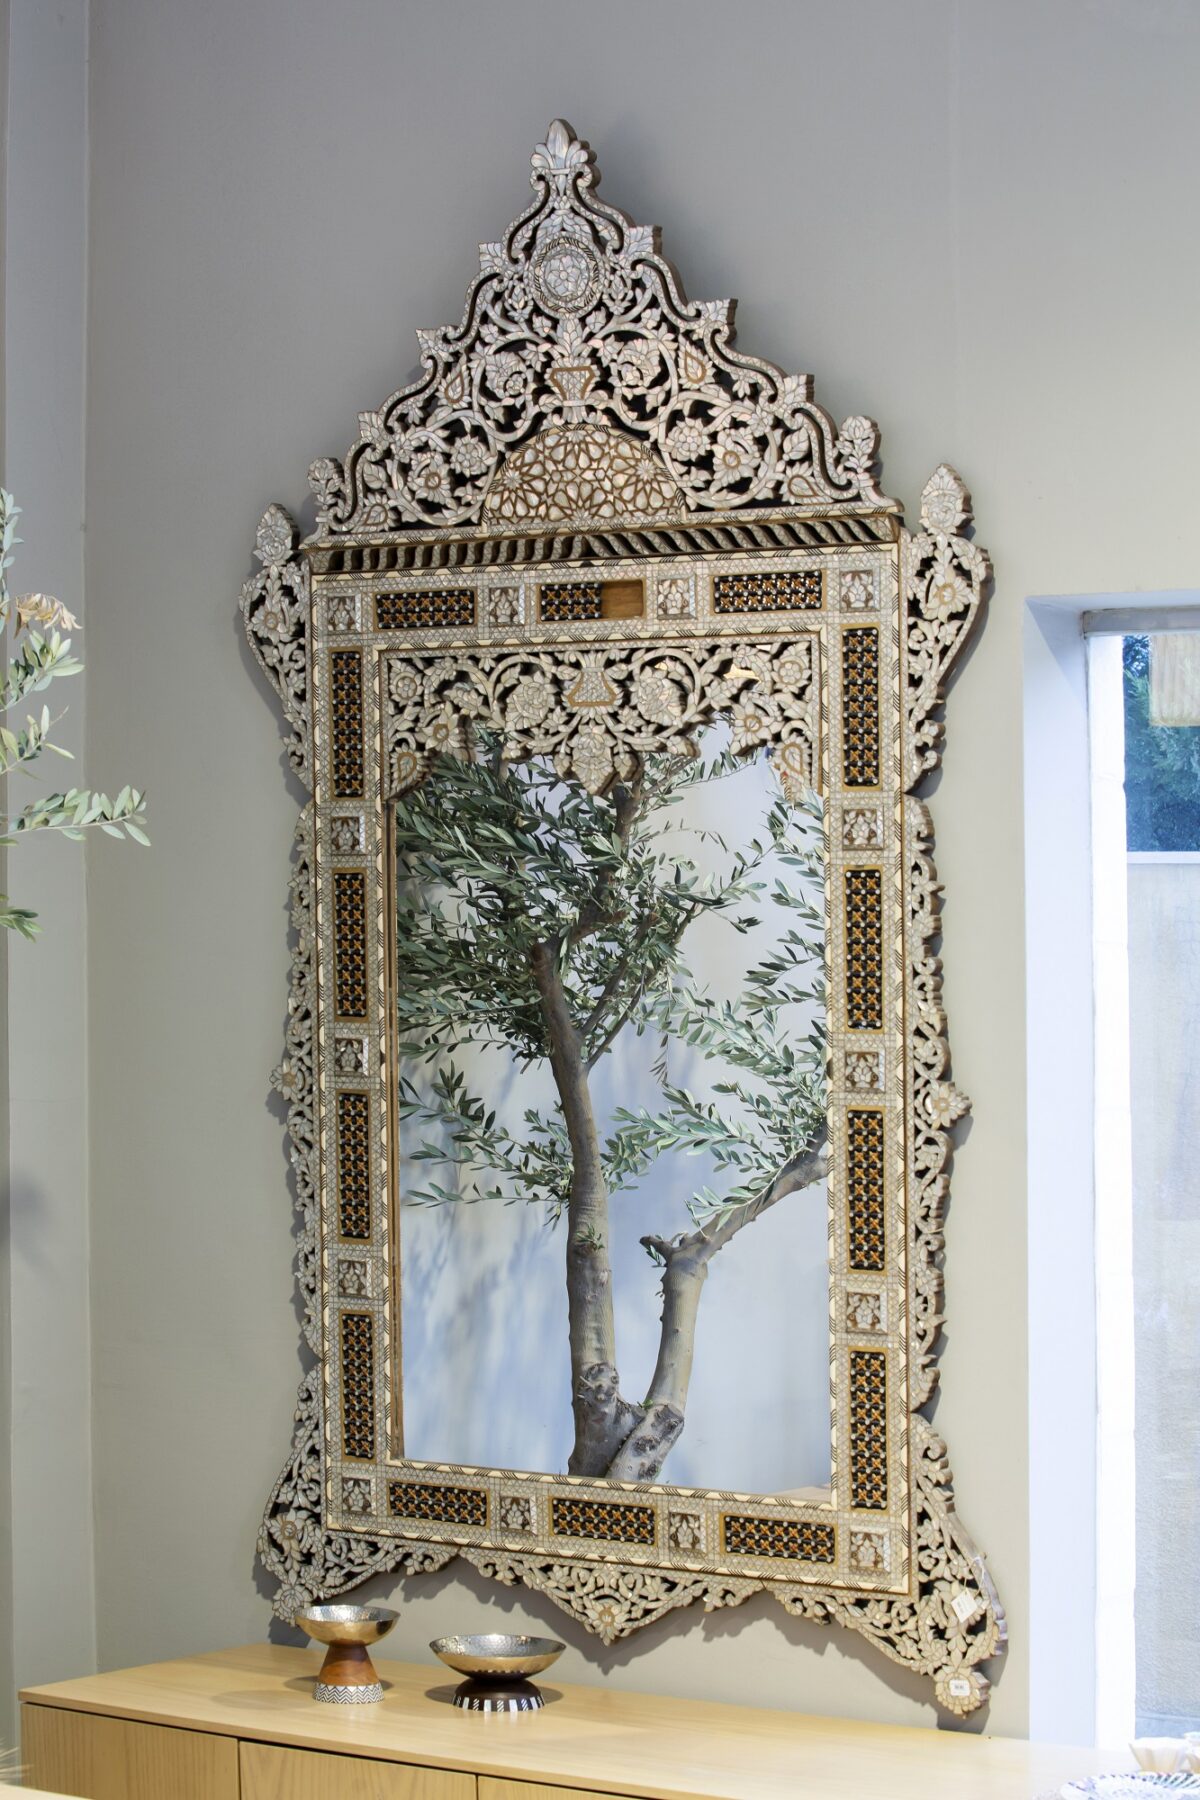 alt="Wood and mother of pearl mirror"